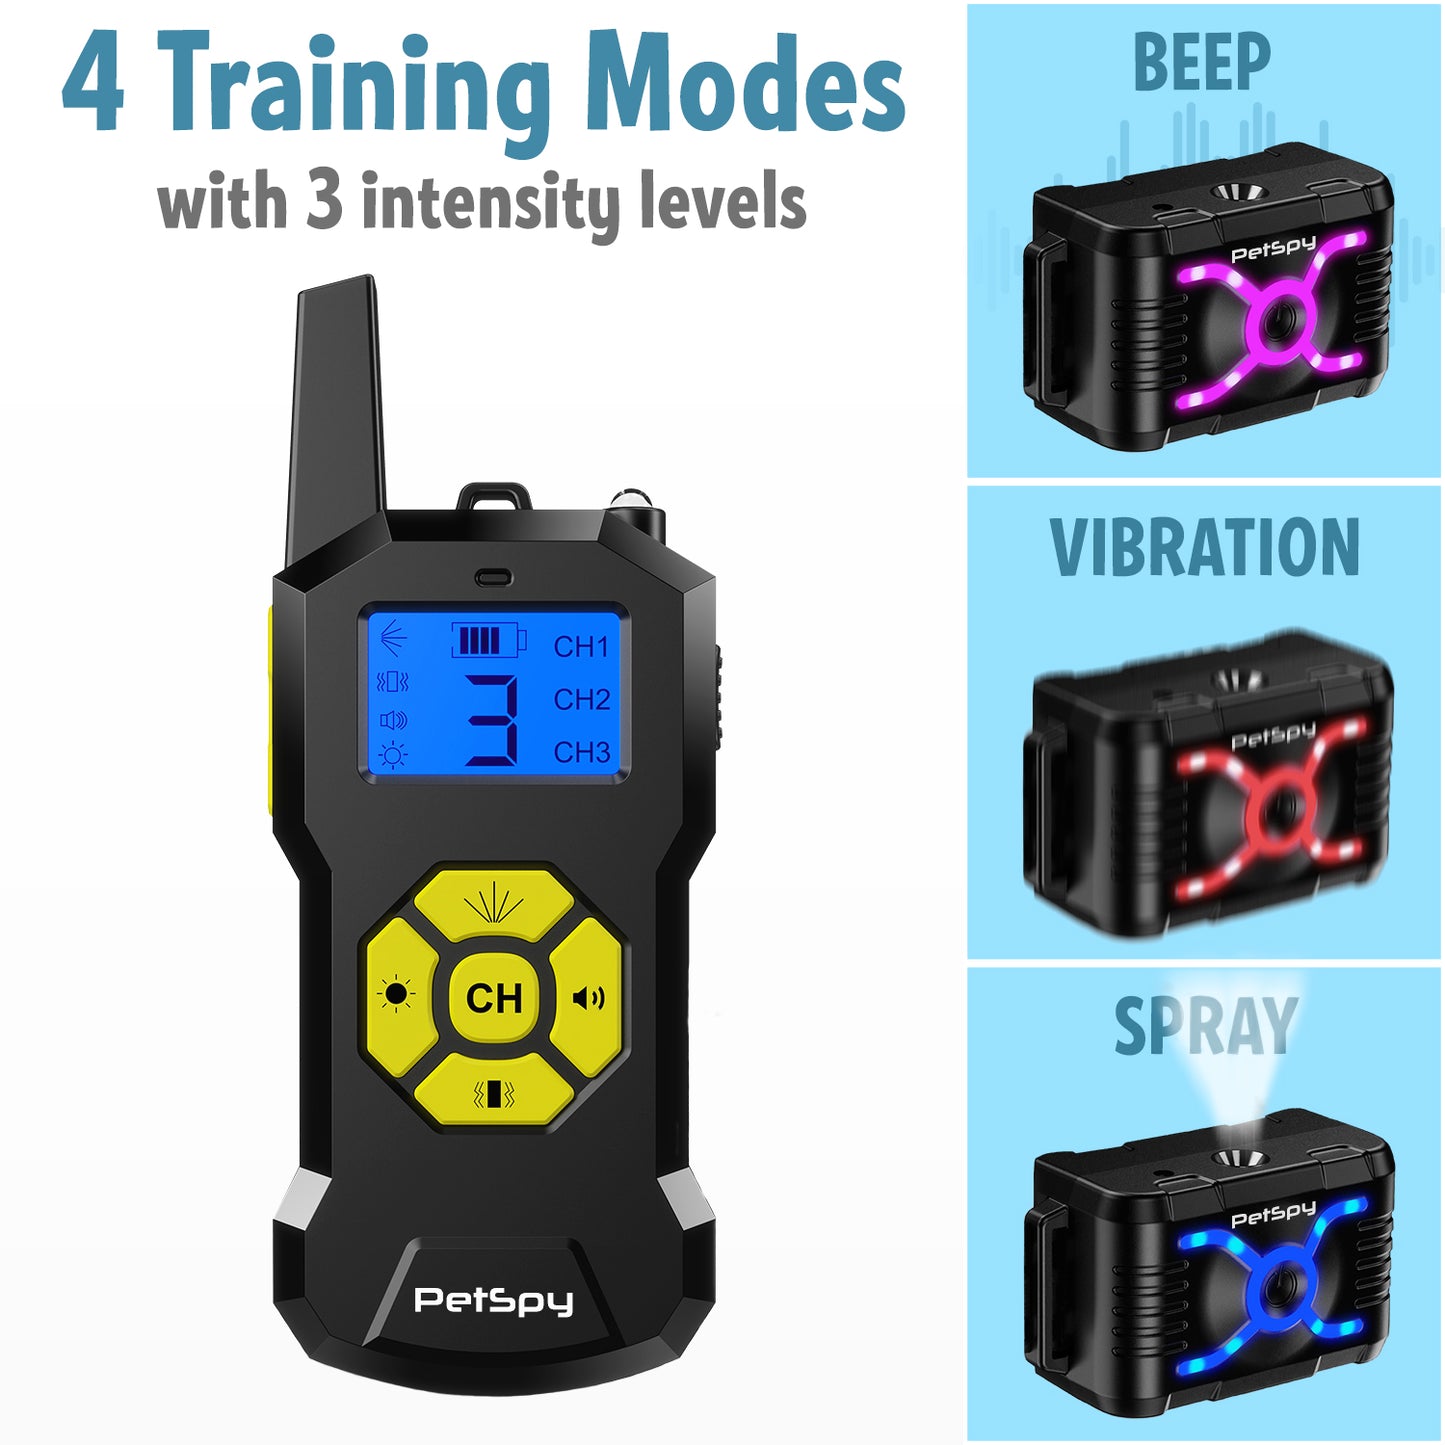 citronella spray for dogs remote has 4 training modes with 3 intensity levels